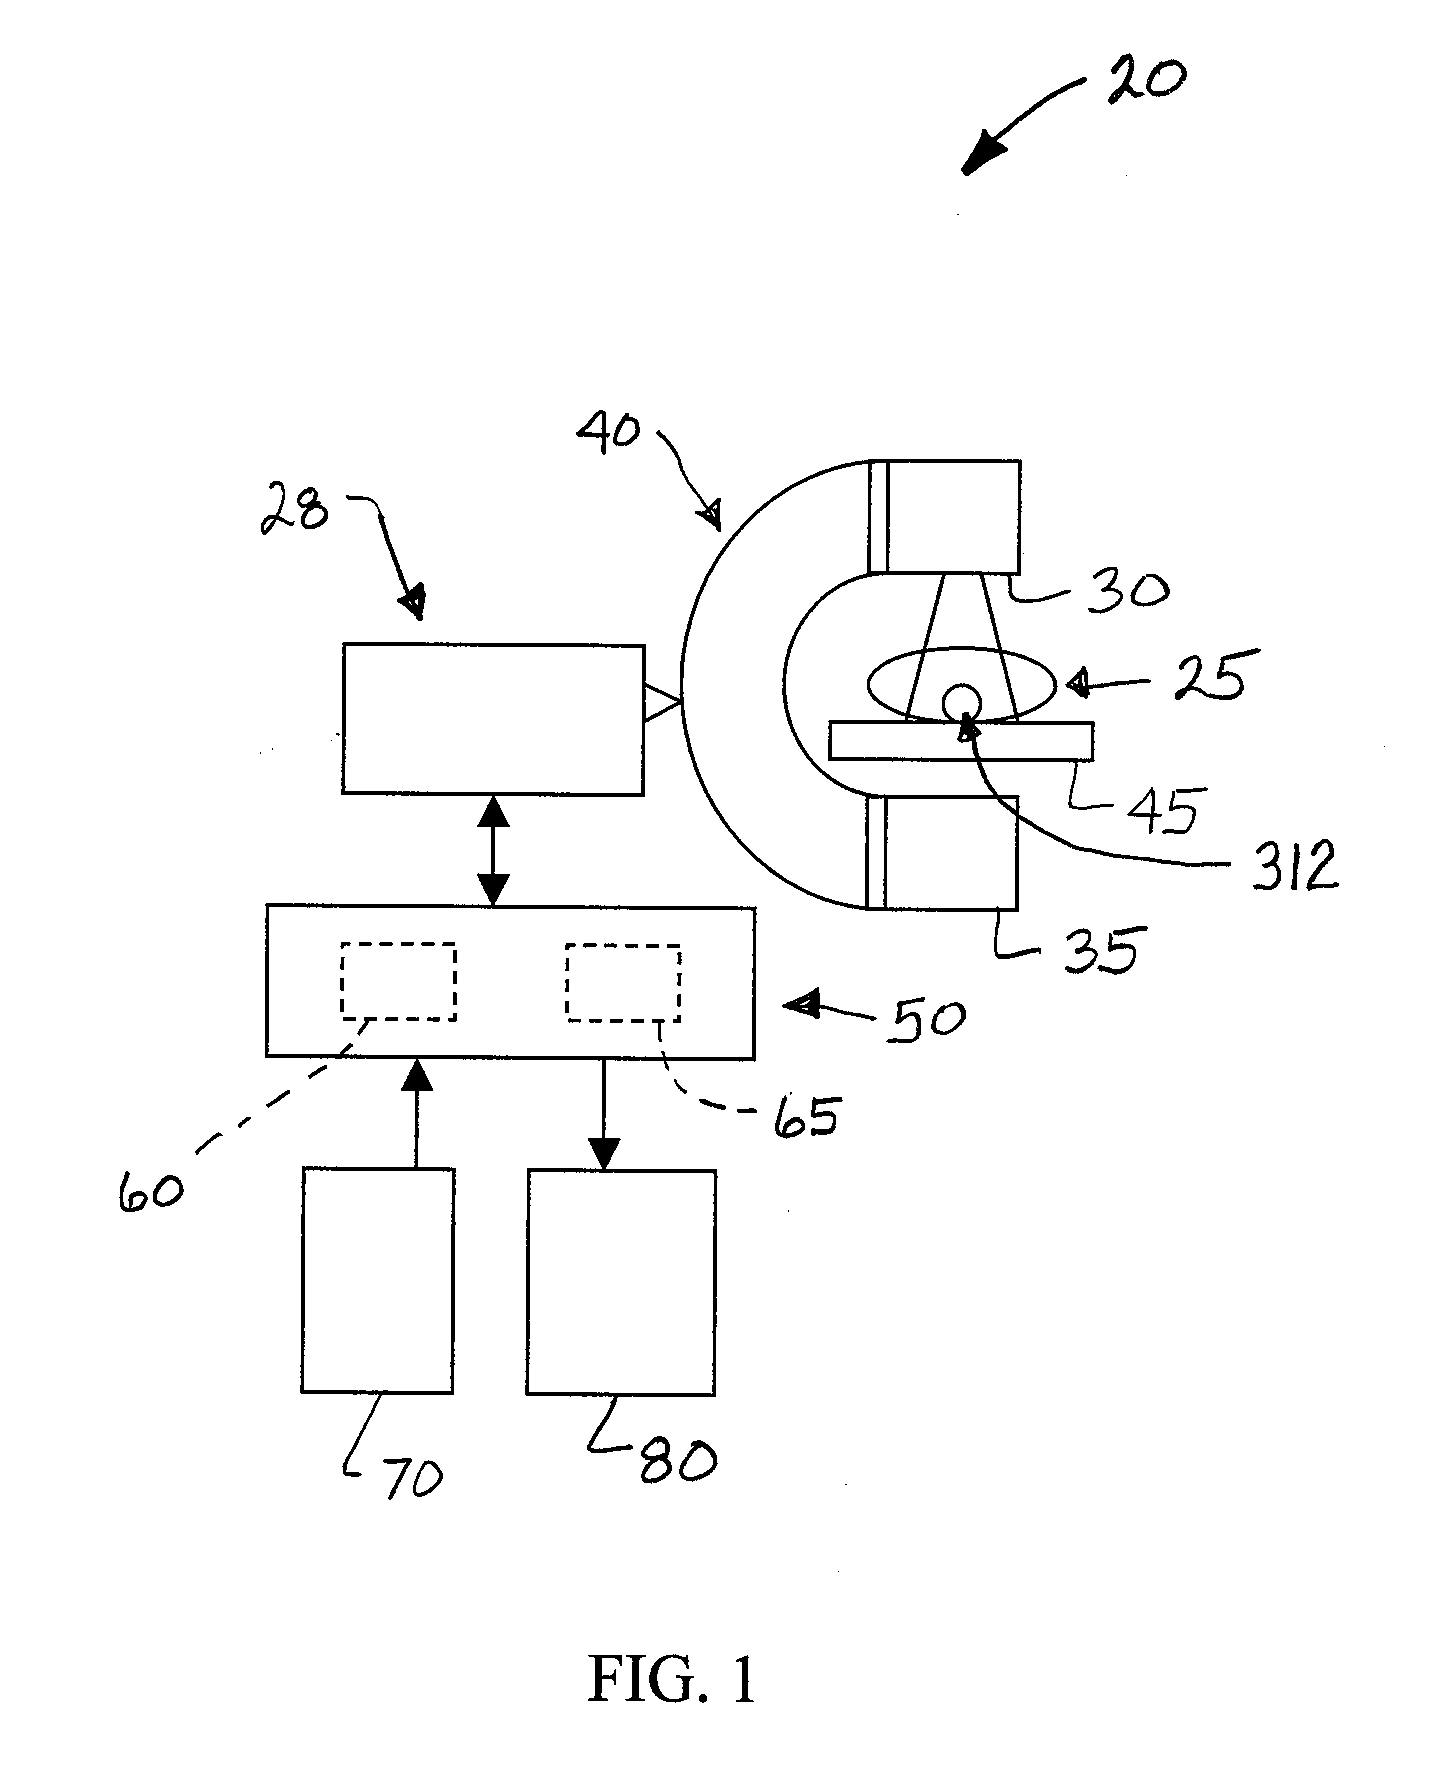 System and method to generate an illustration of a cardiac region of interest